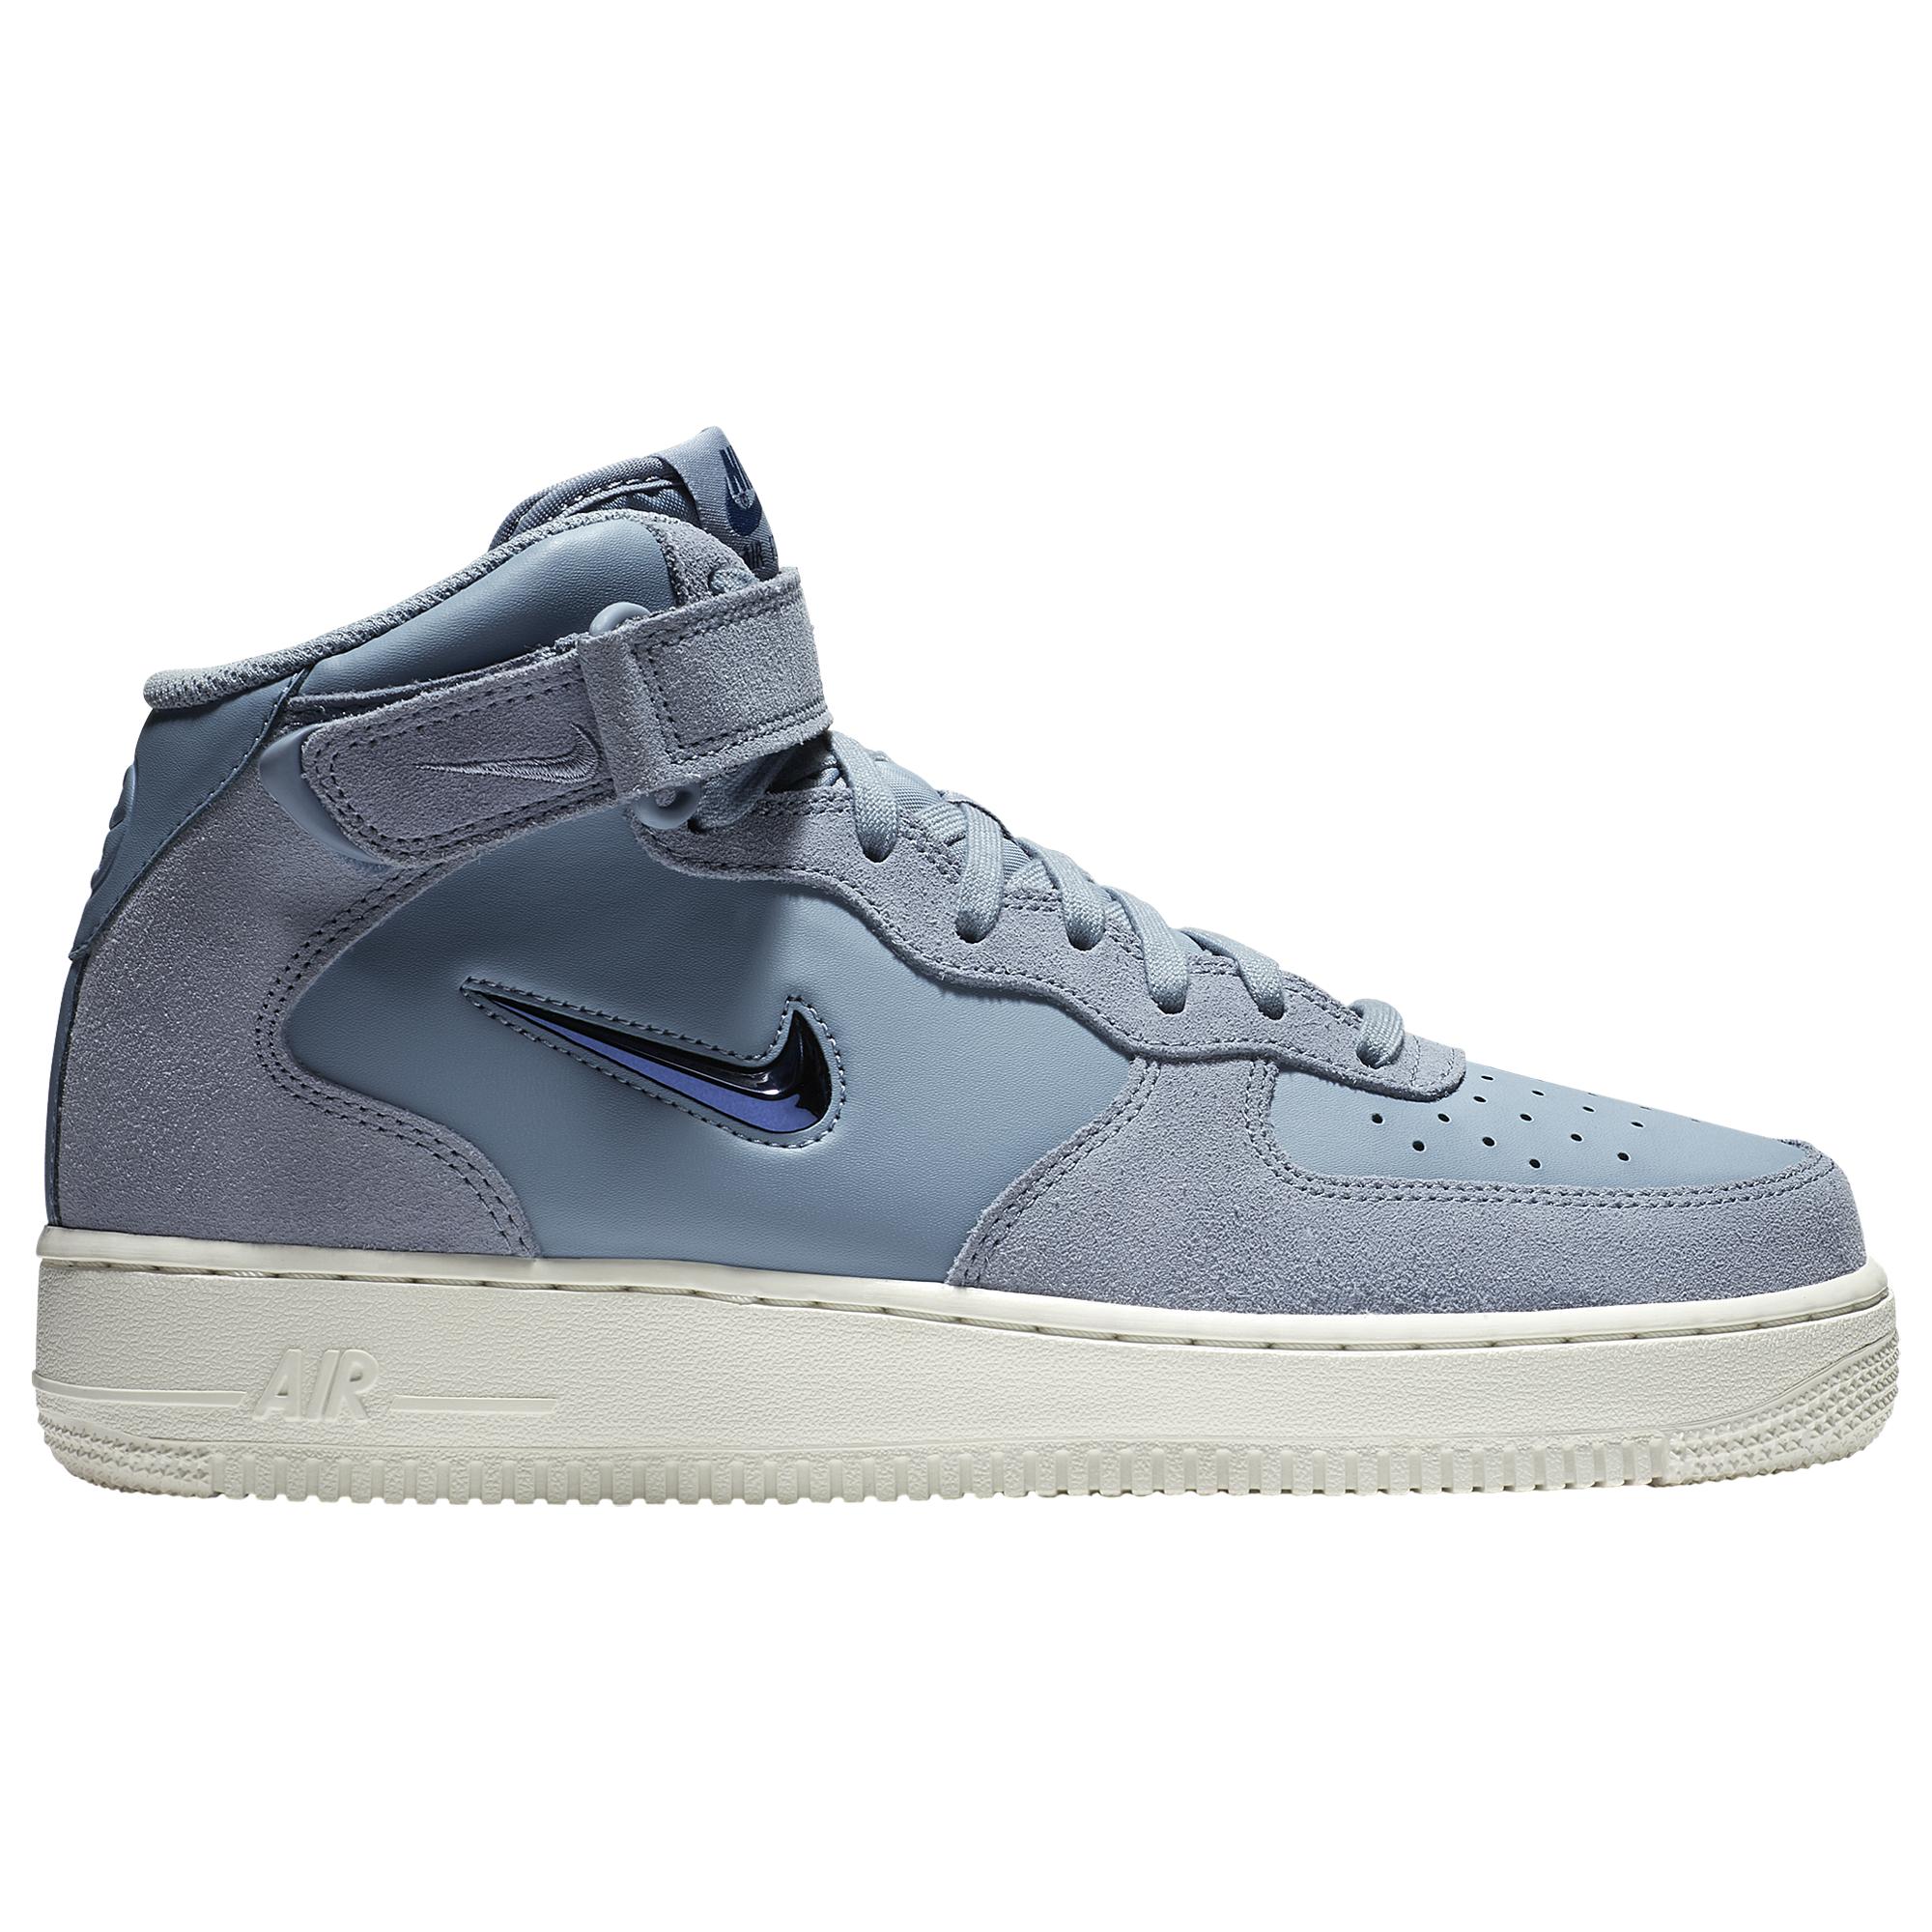 Nike Air Force 1 Mid 07 Lv8 in Blue for Men - Lyst